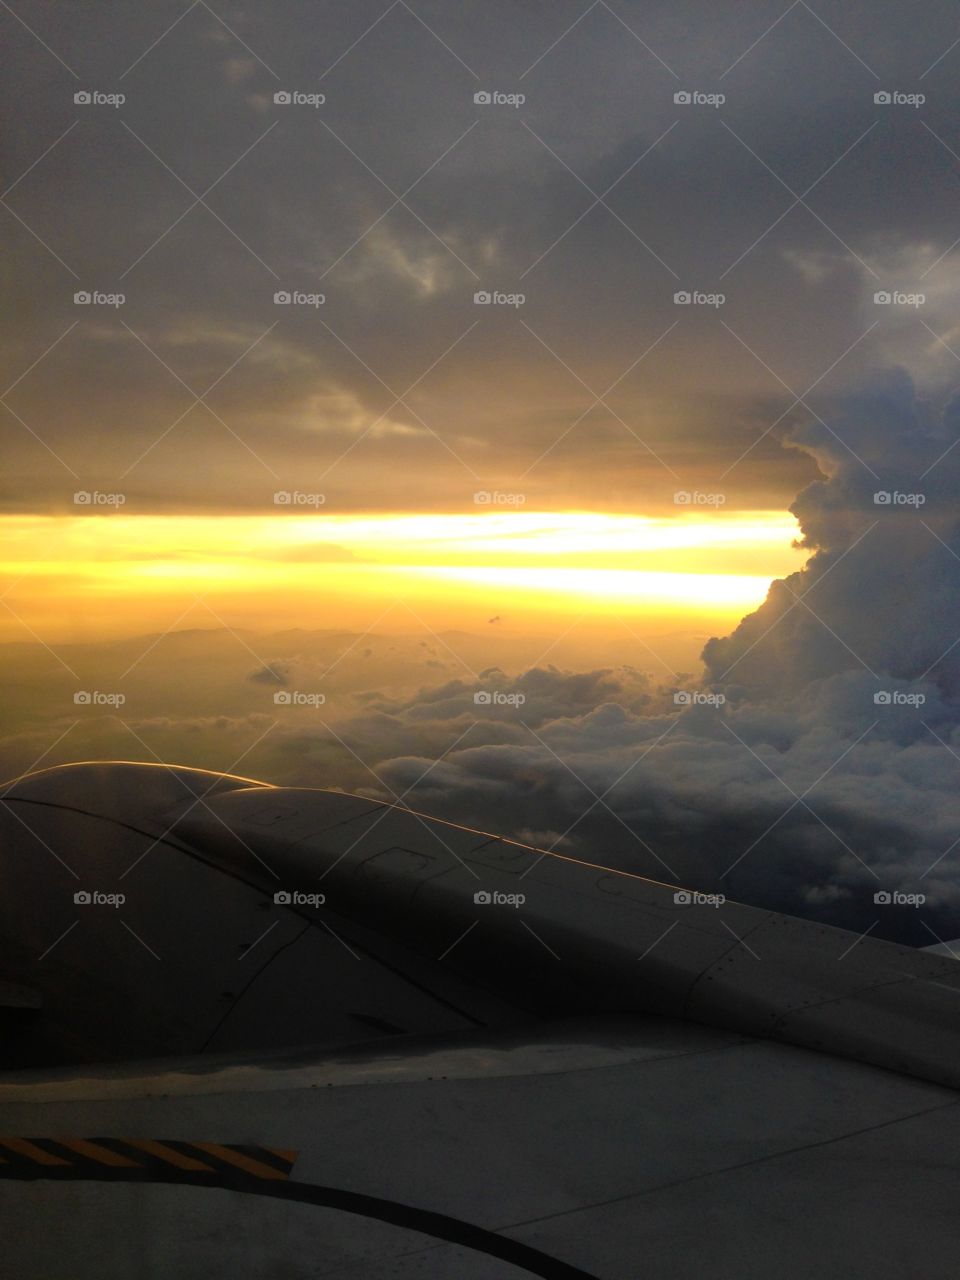 Sunset above the clouds. Sunset viewed from ab aeroplane